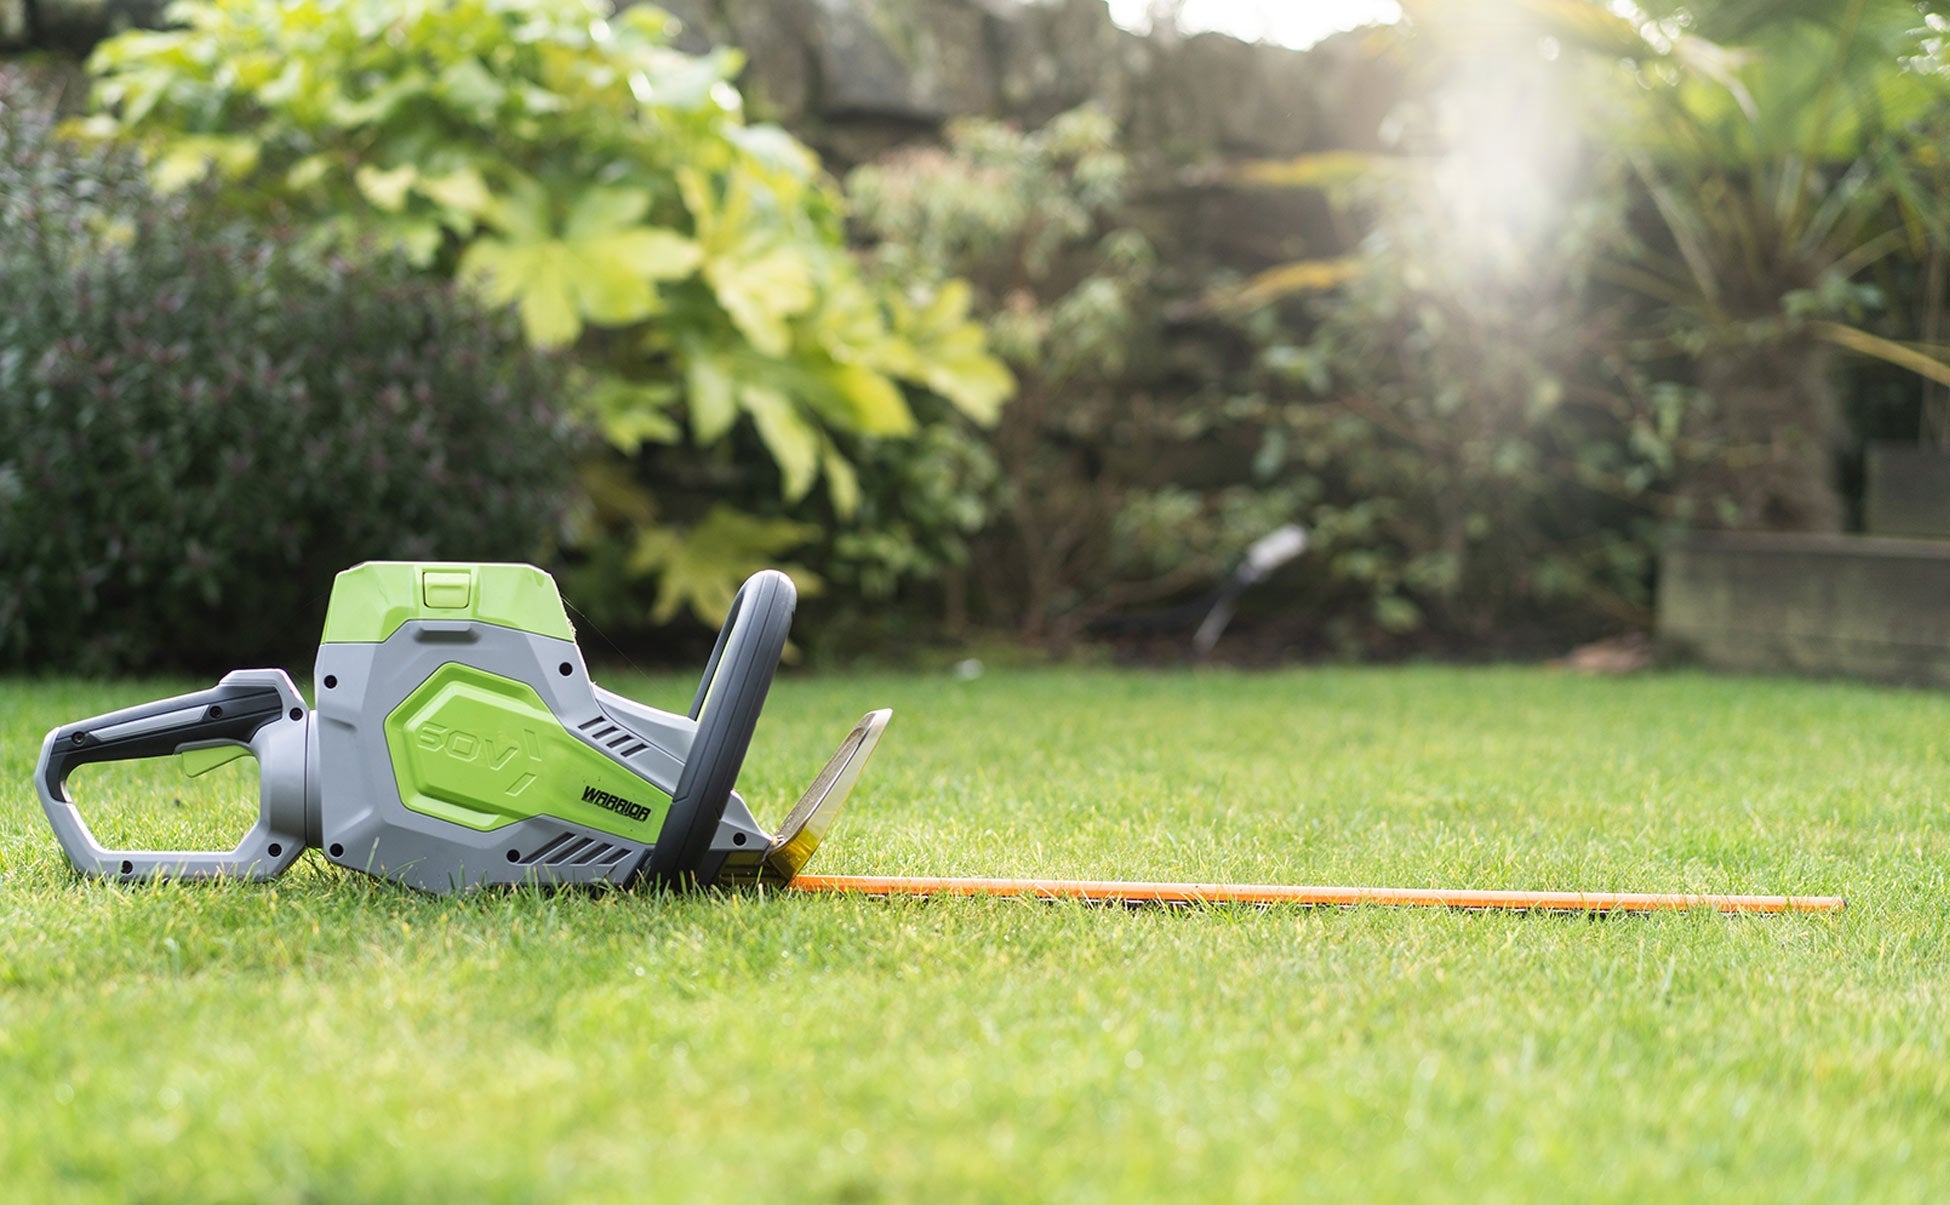 Imagine the Warrior Eco 61cm Cordless Hedge Trimmer in your garden